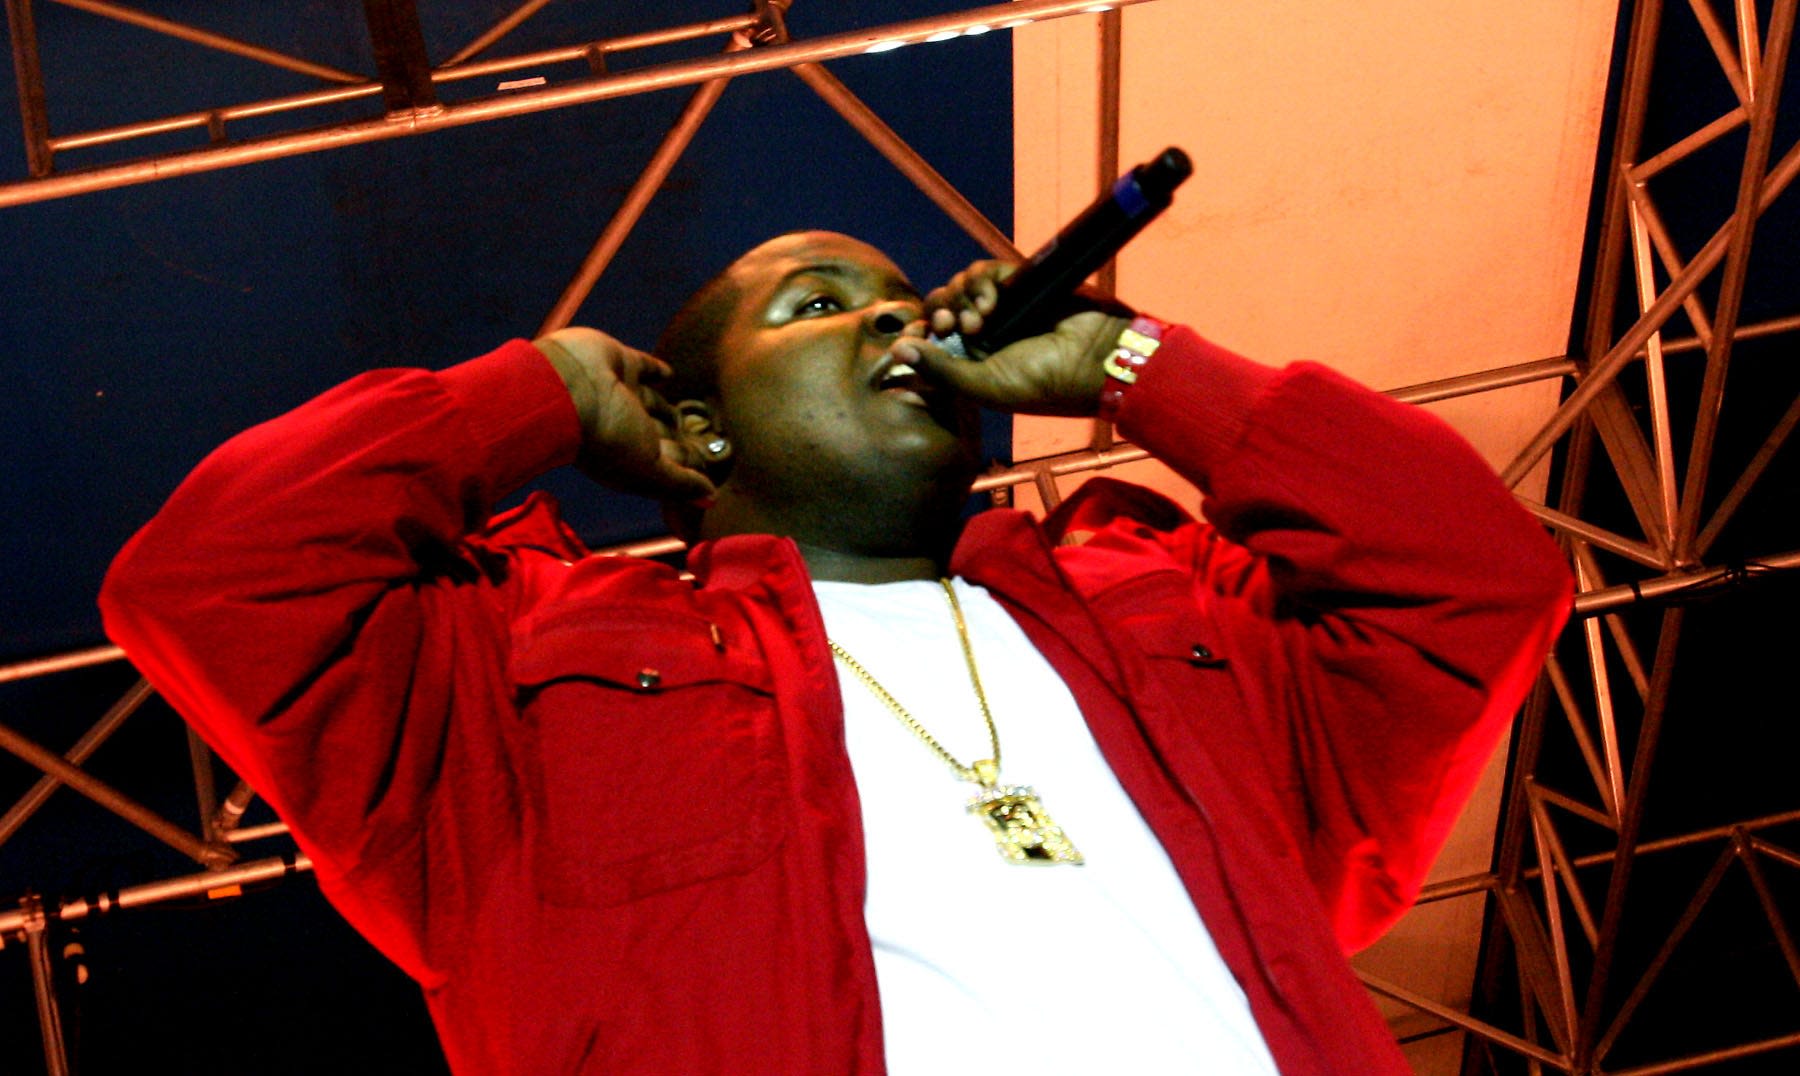 Rap star Sean Kingston, mother appear in South Florida federal court on wire fraud charges